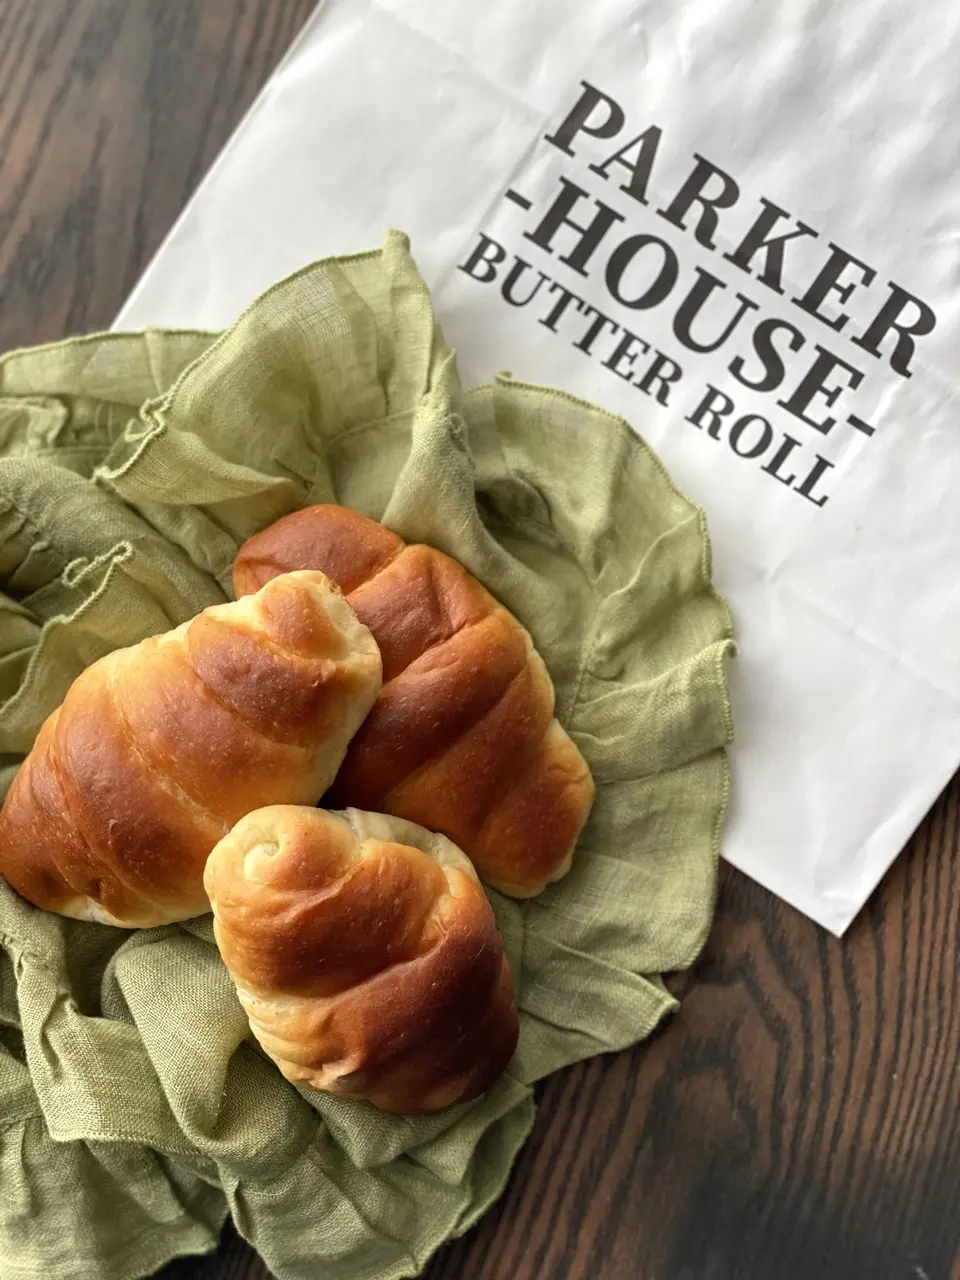 PARKER HOUSE BUTTER ROLLのバターロール